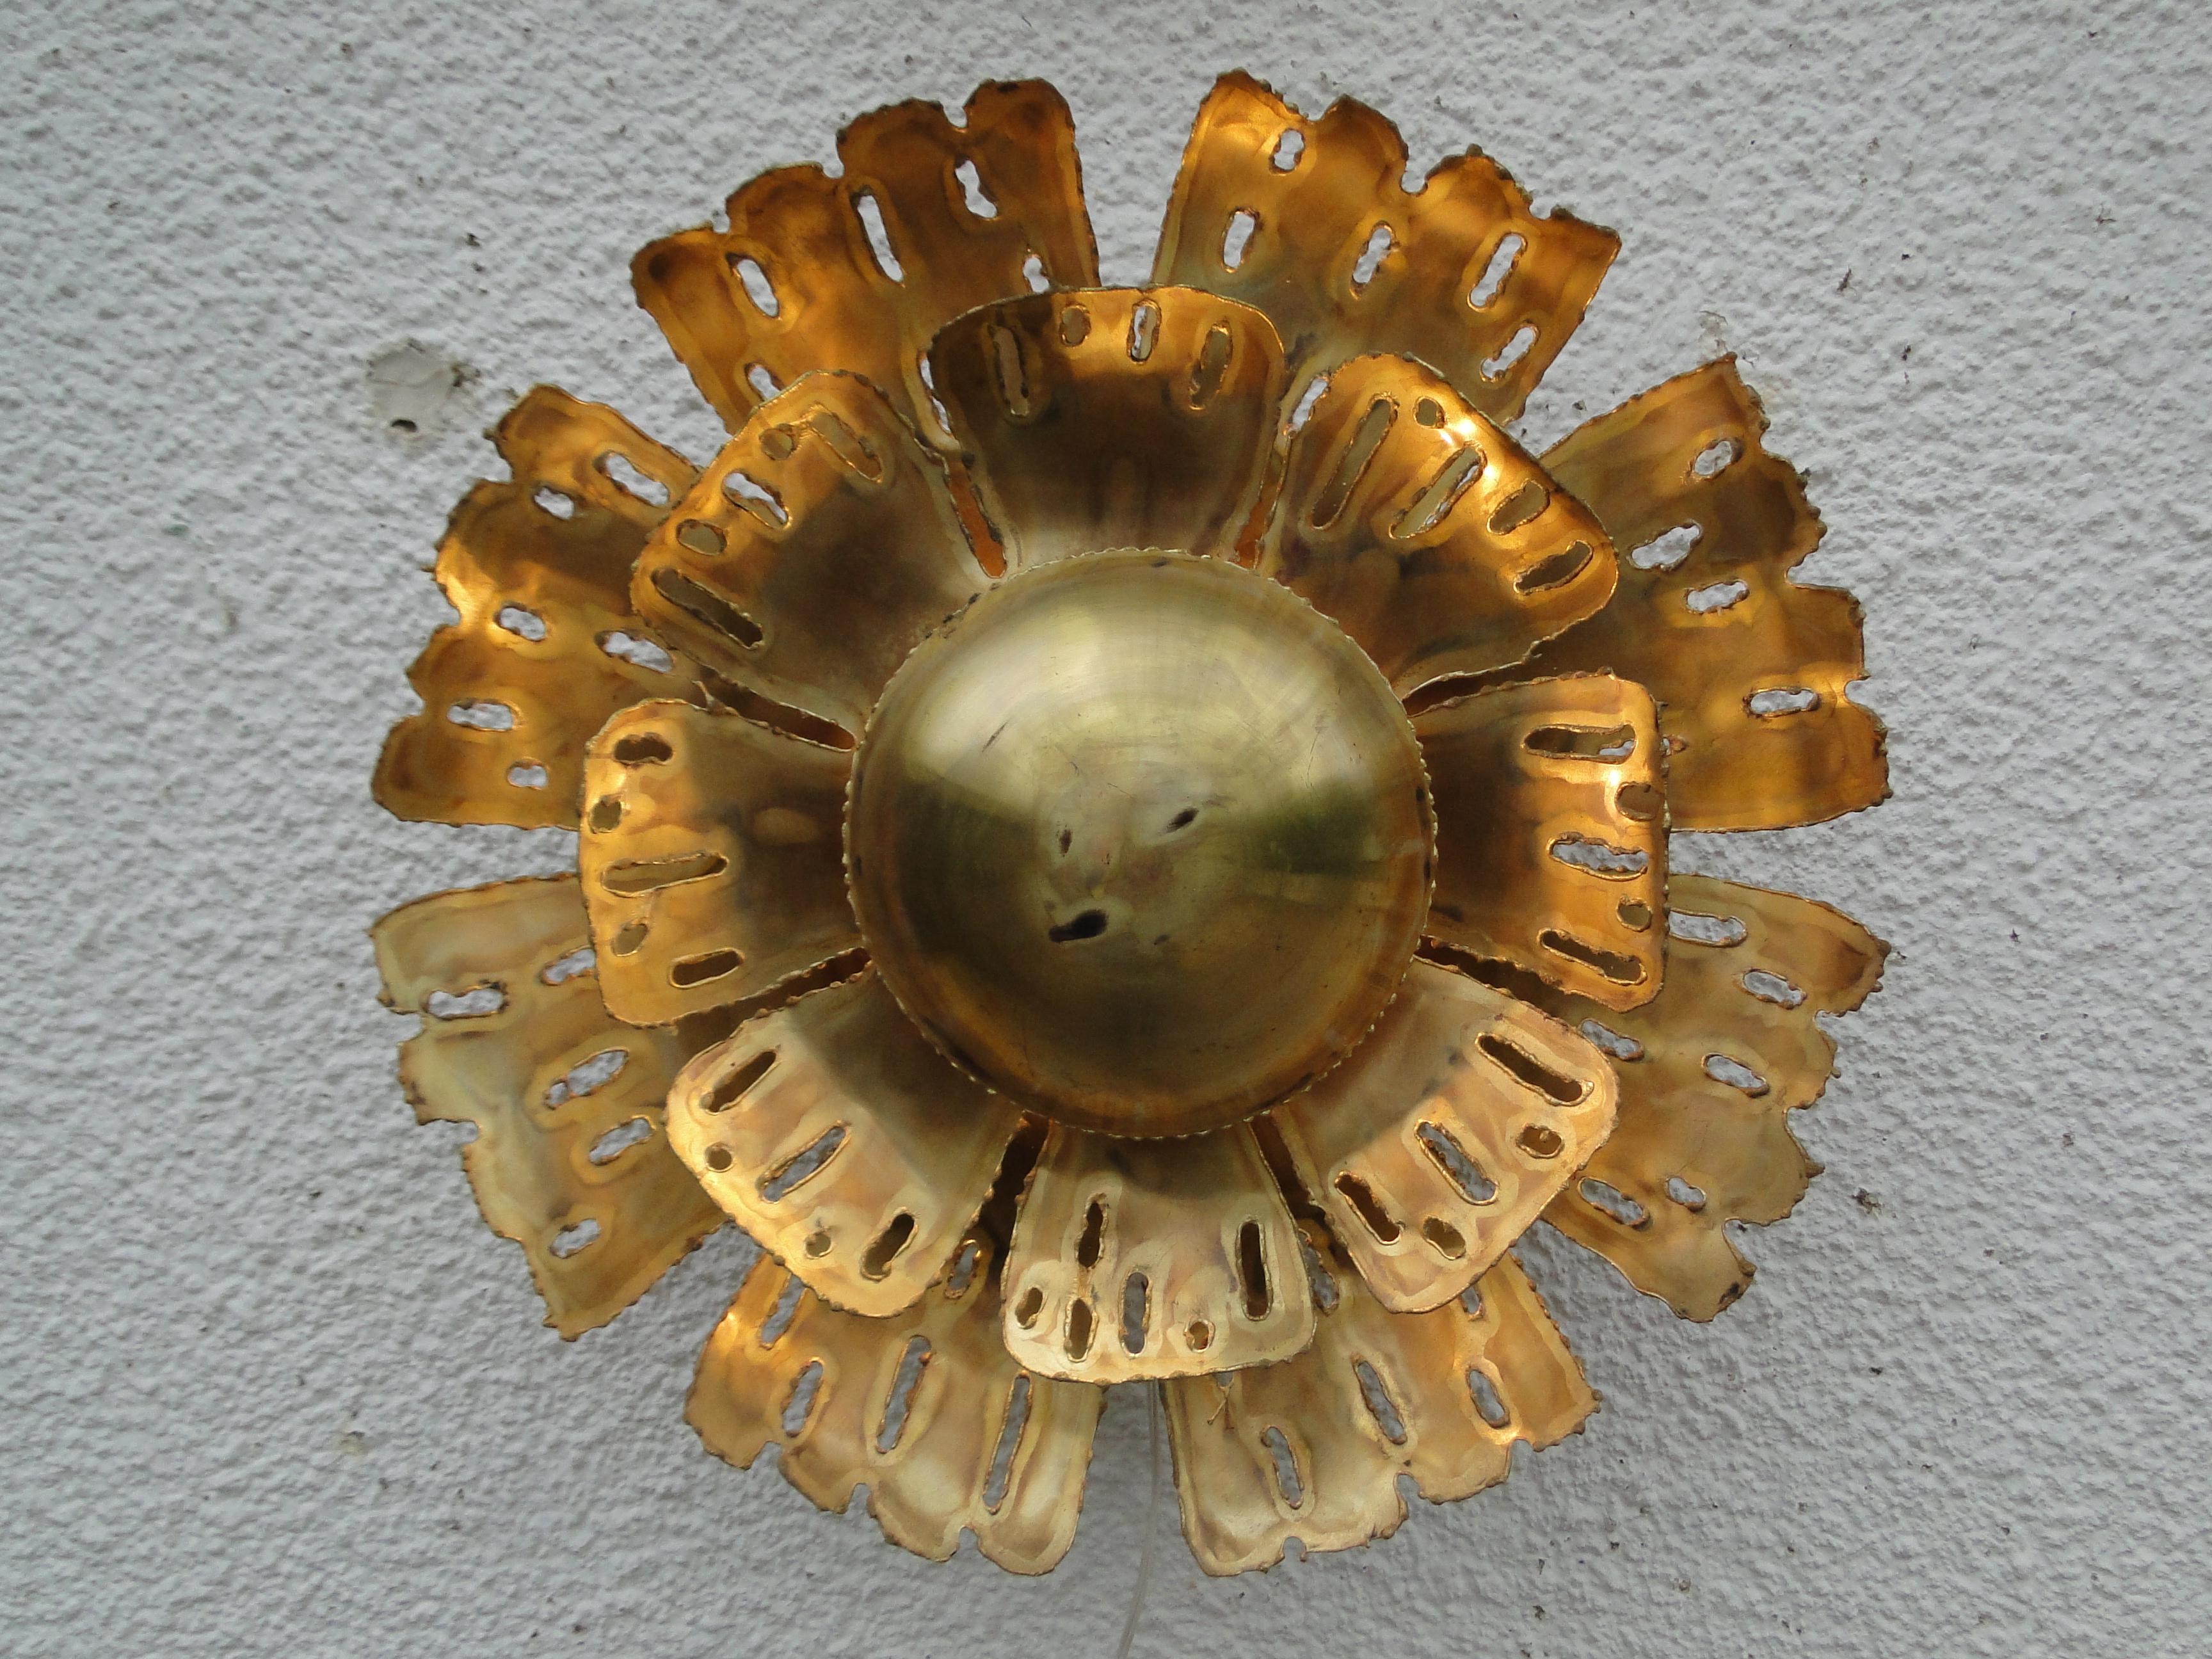 Extra large sun-shaped brass wall lamp designed by Svend Aage Holm Sørensen in the 1960s. Produced by his company Holm Sørensen & Co., this eye-catching style no. 5207 is a true masterpiece and trademark of the Danish designer.

* A flame-cut